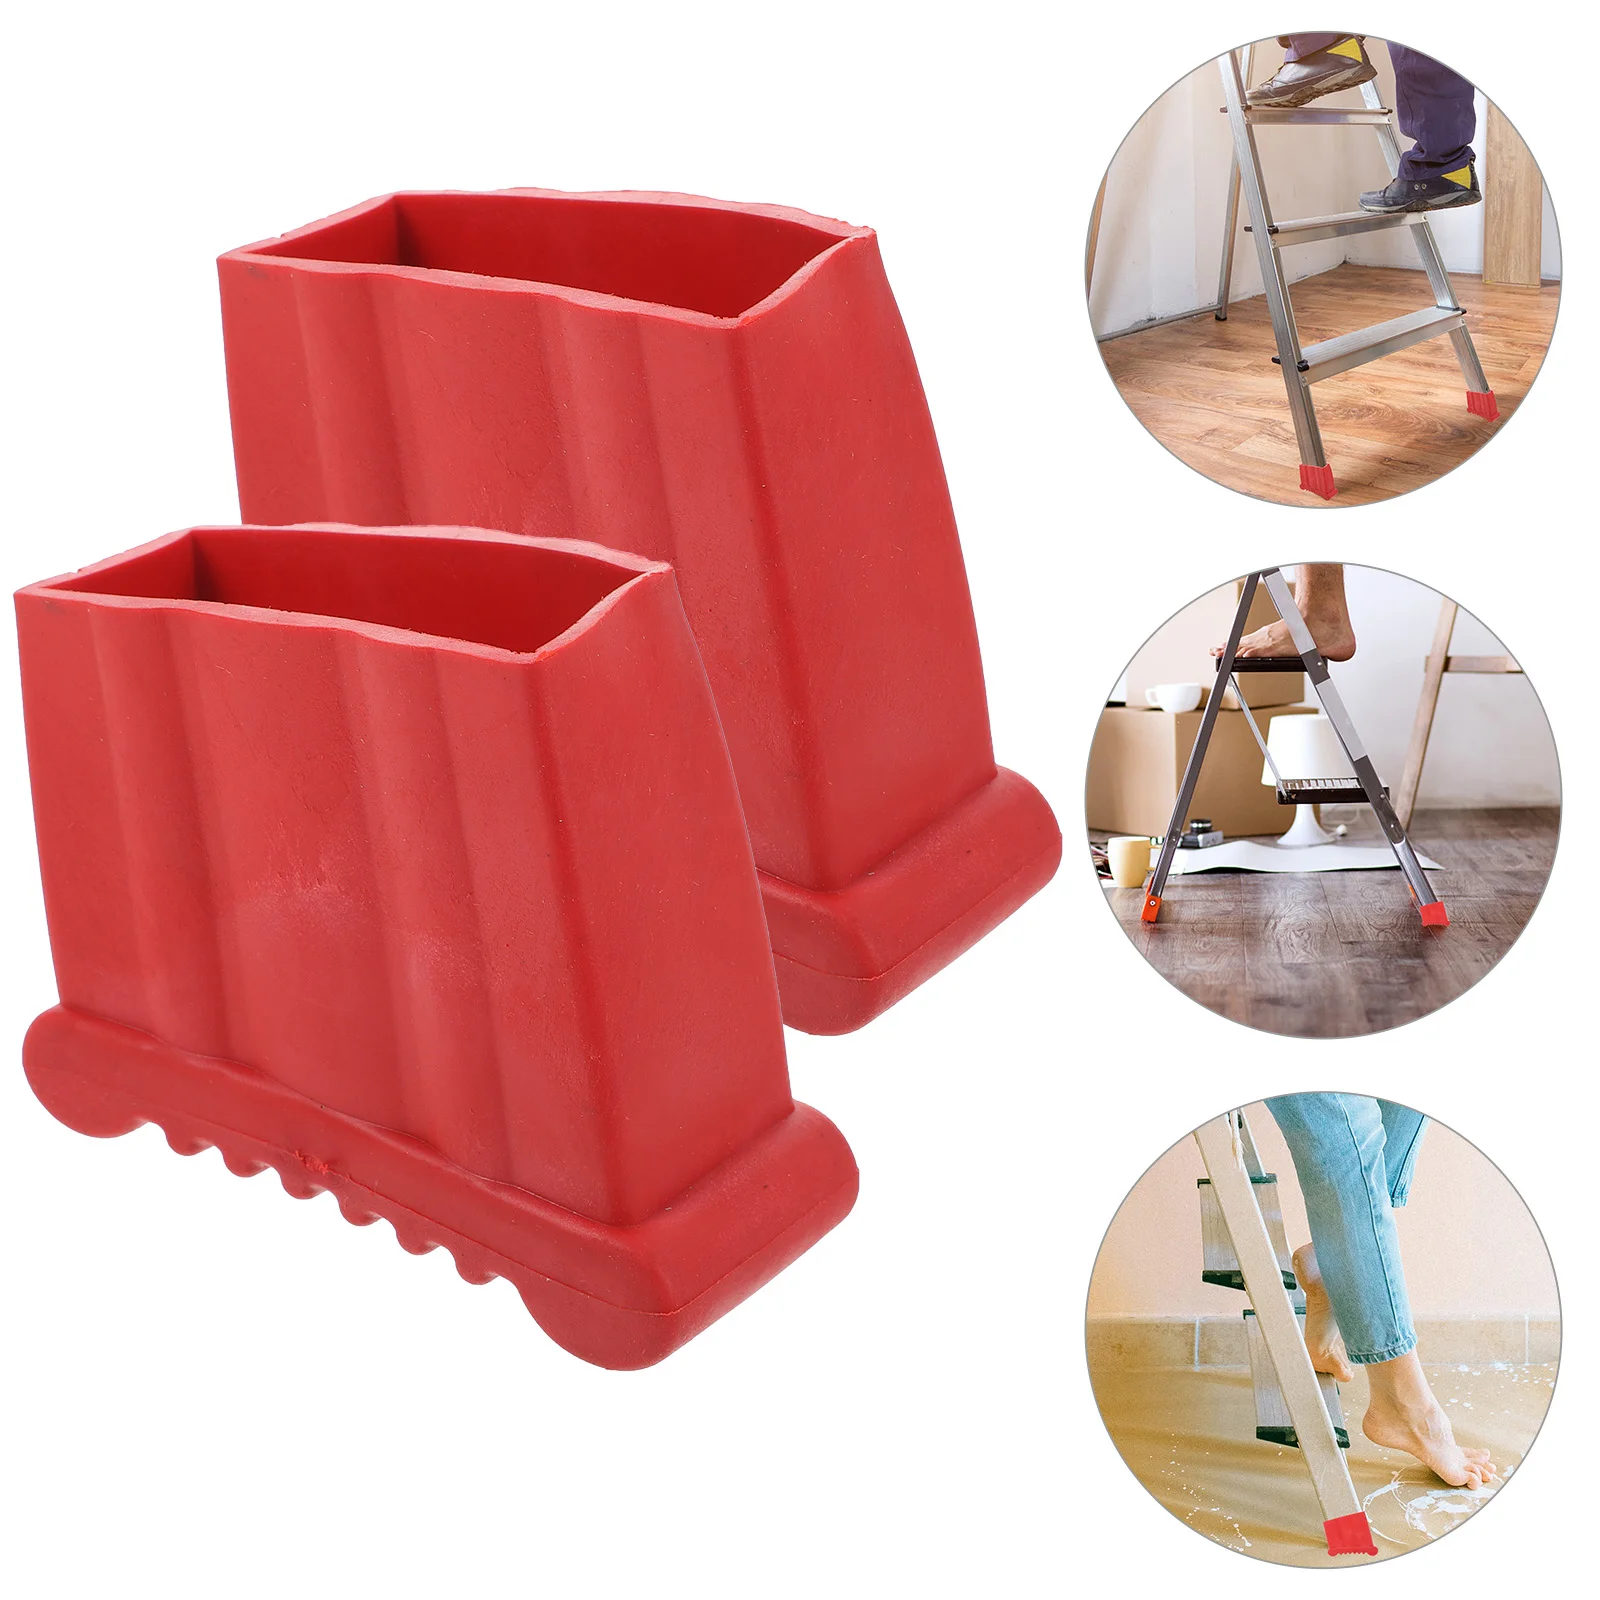 

Telescoping Ladder Foot Cover Step Feet Pads Cushion Covers for Rubber Nonslip Parts Accessories Telescoping